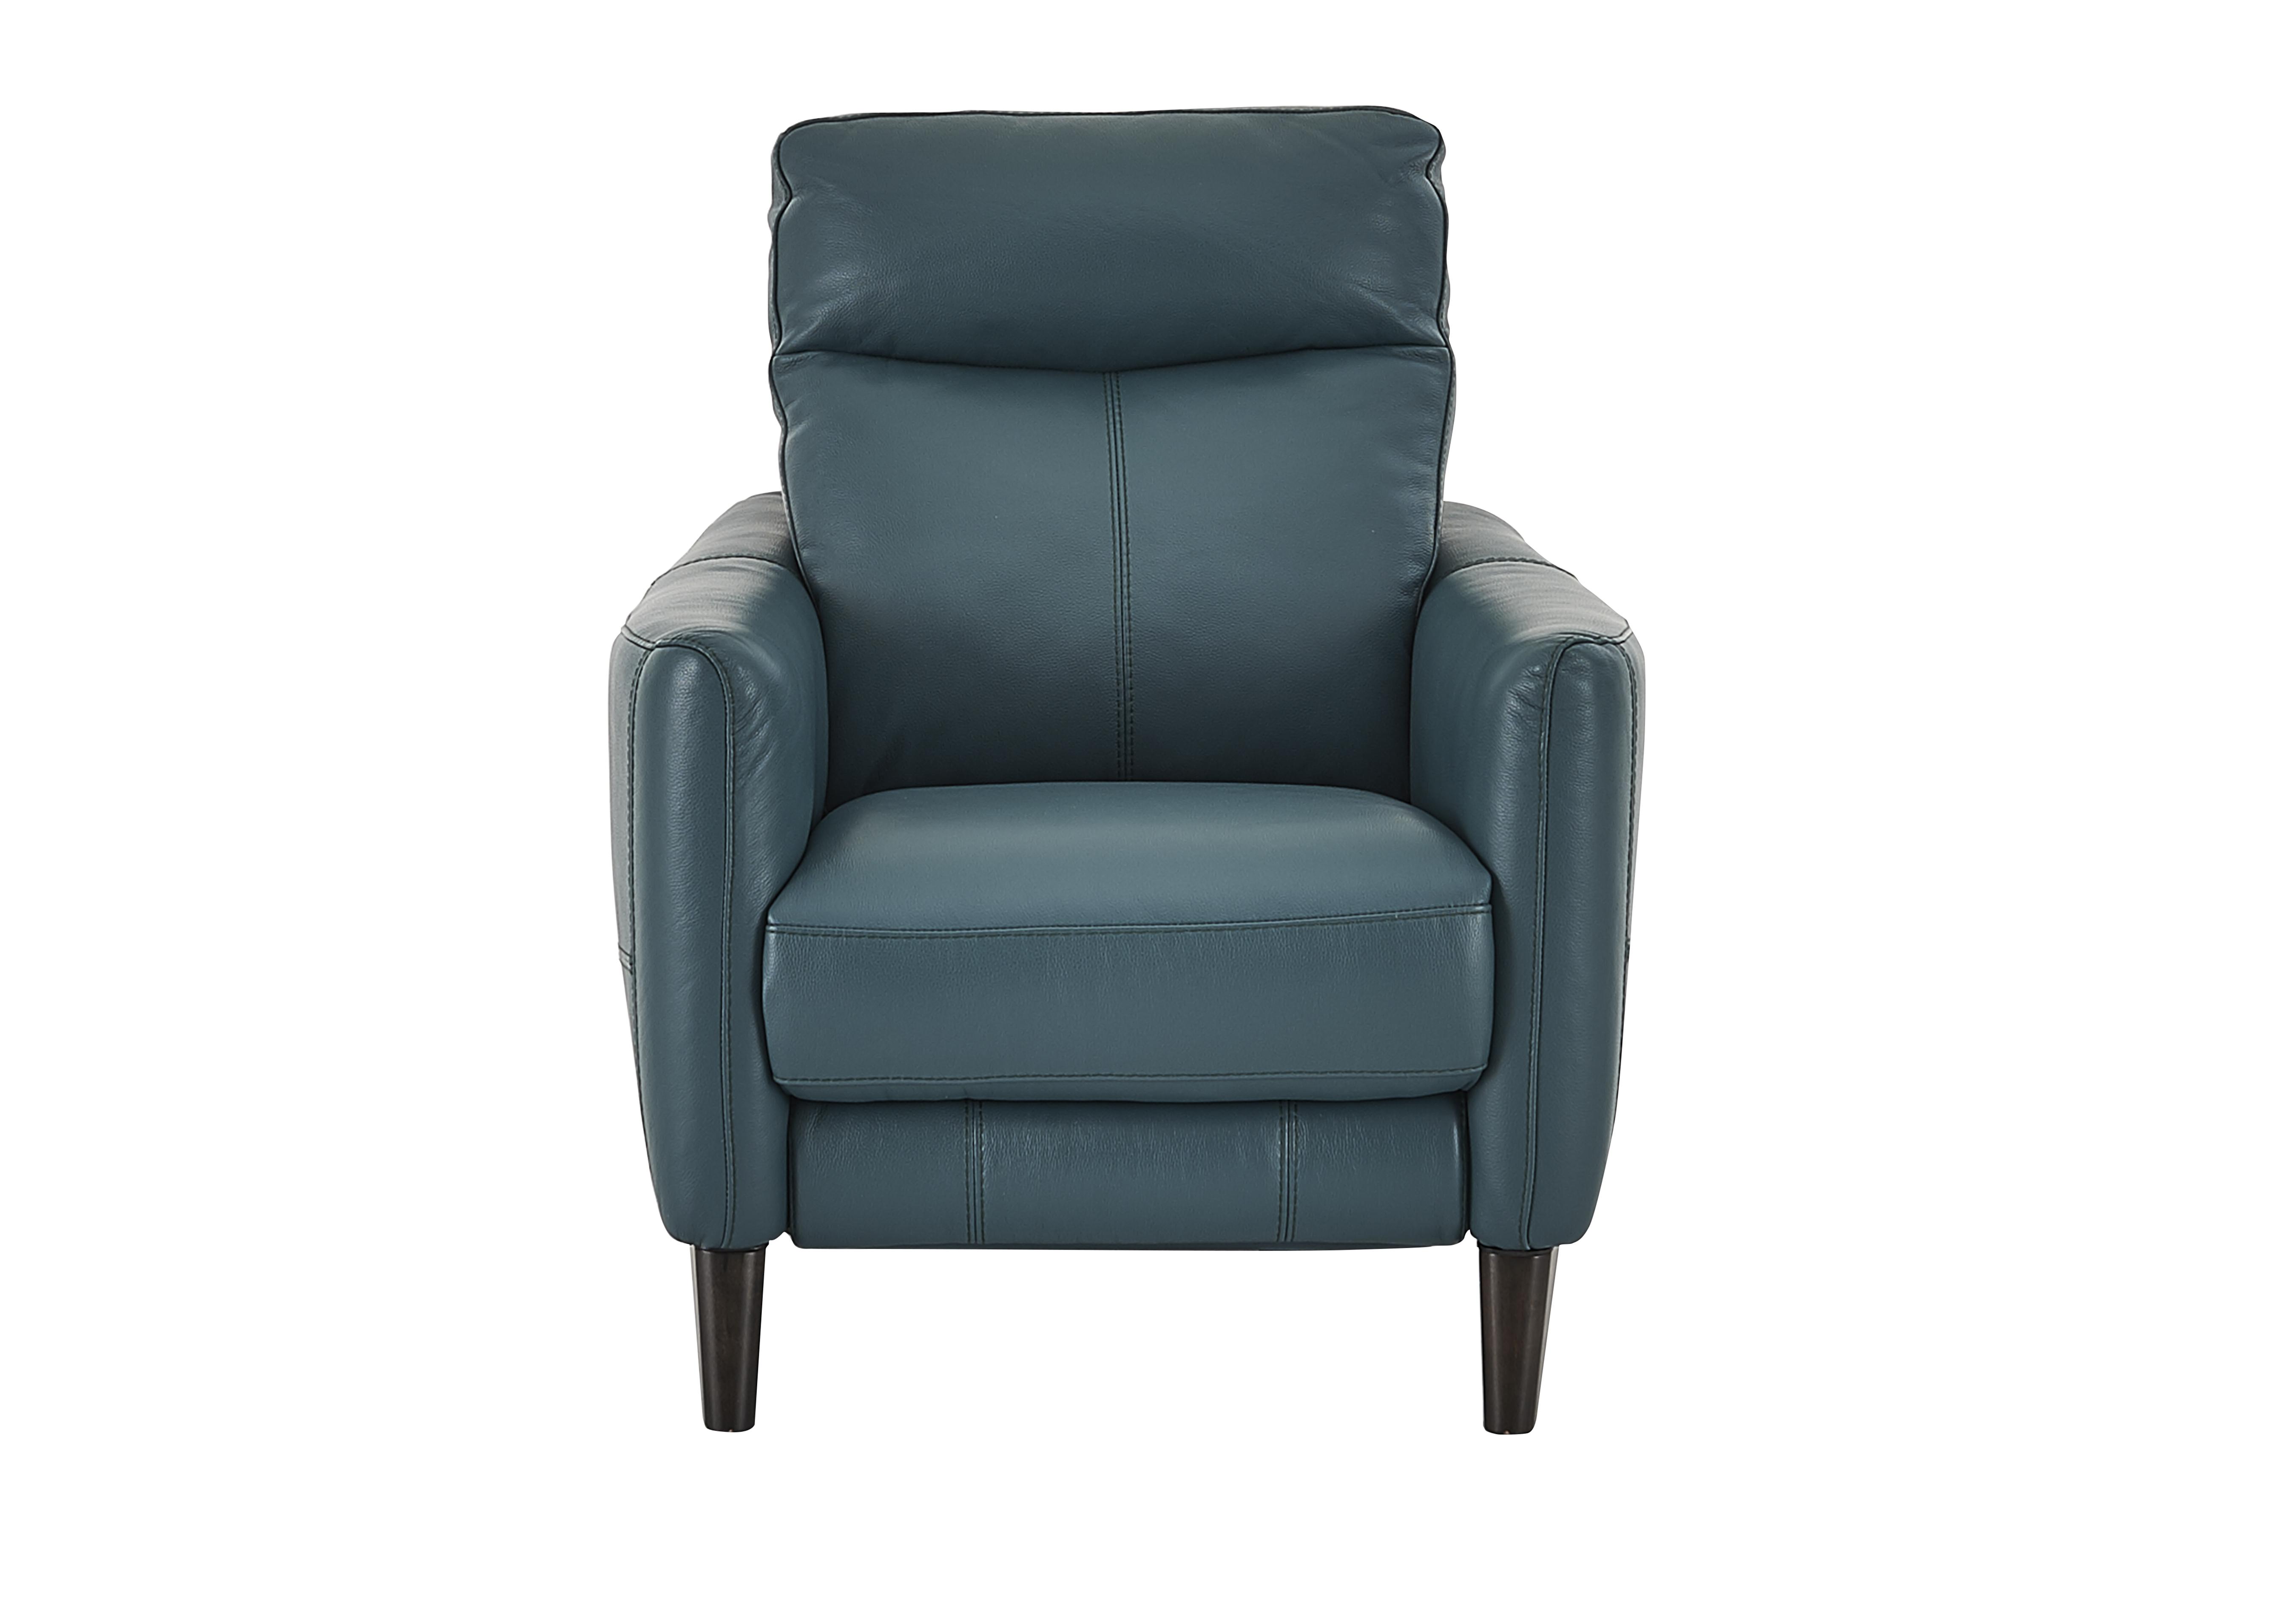 Compact Collection Petit Leather Recliner Armchair in Nc-301e Lake Green on Furniture Village